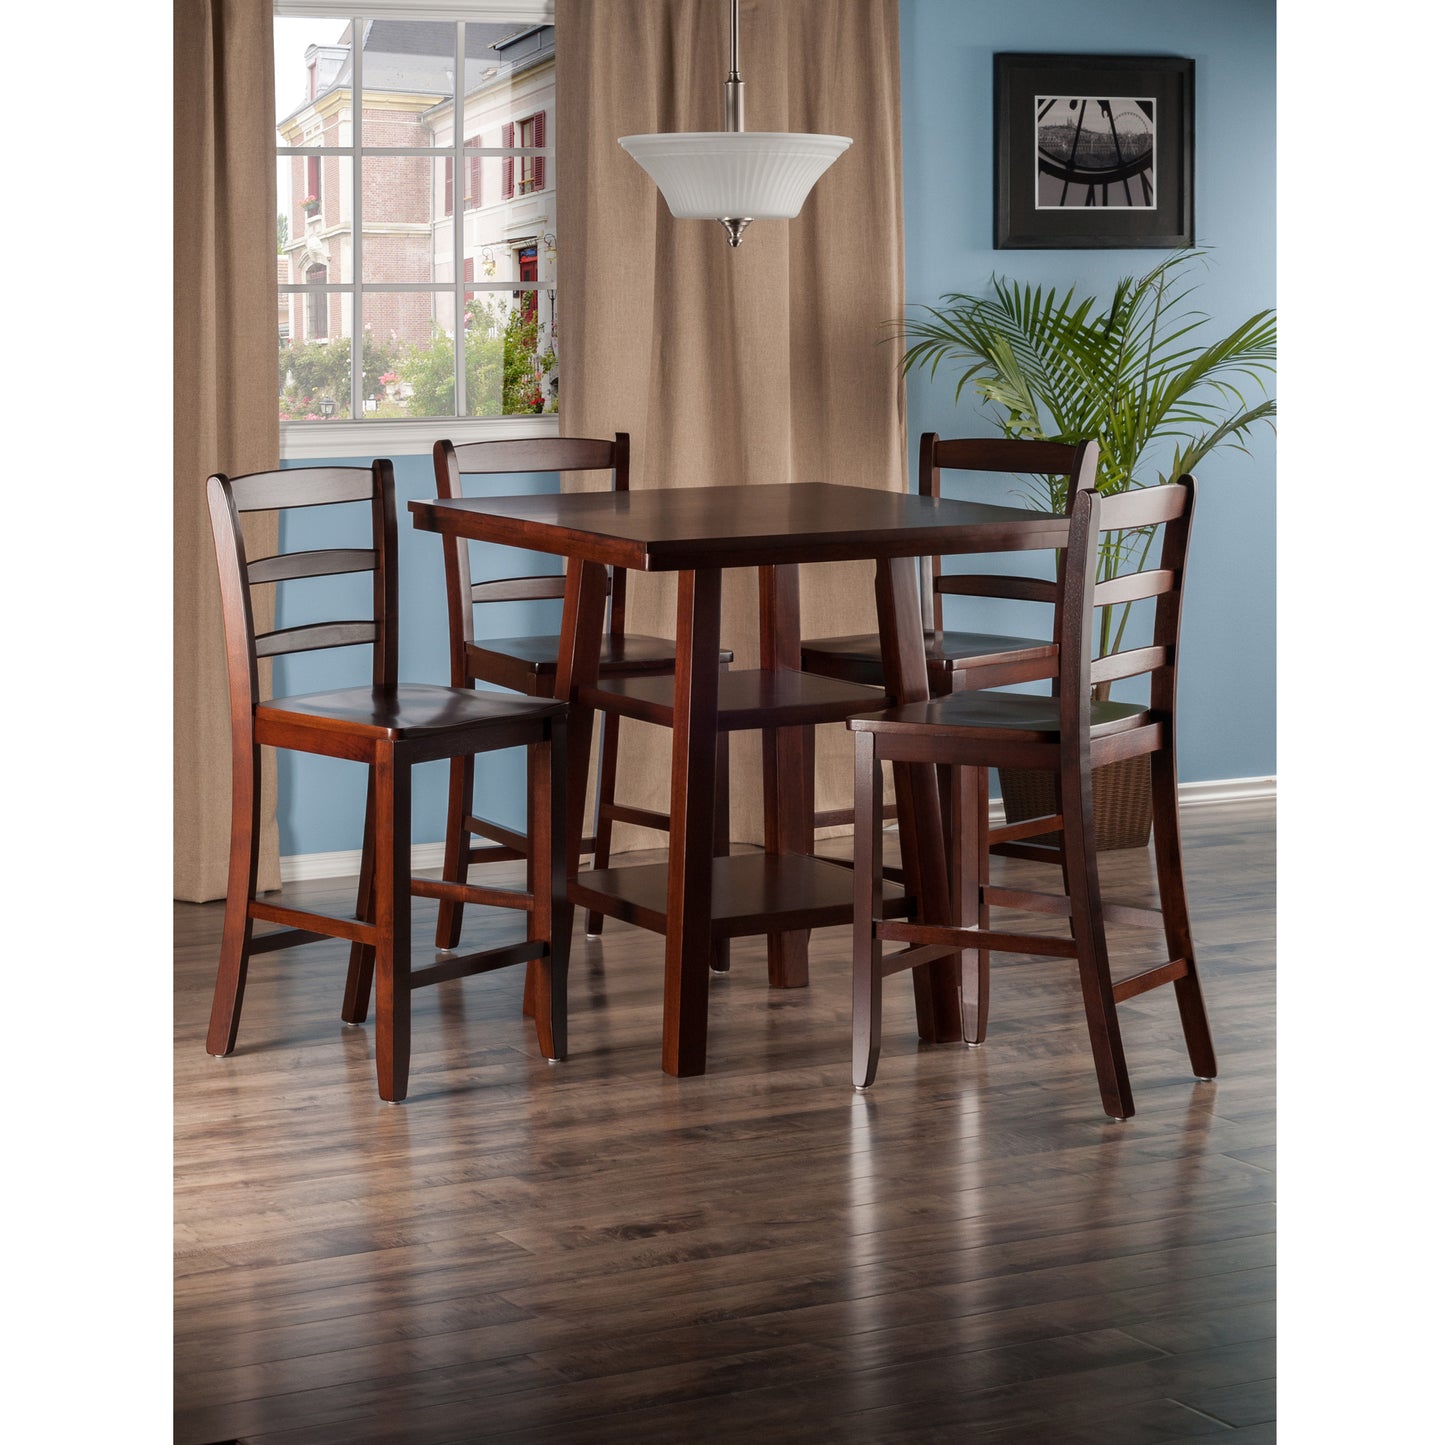 Orlando 5-Pc High Table with Ladder-back Counter Stools, Walnut